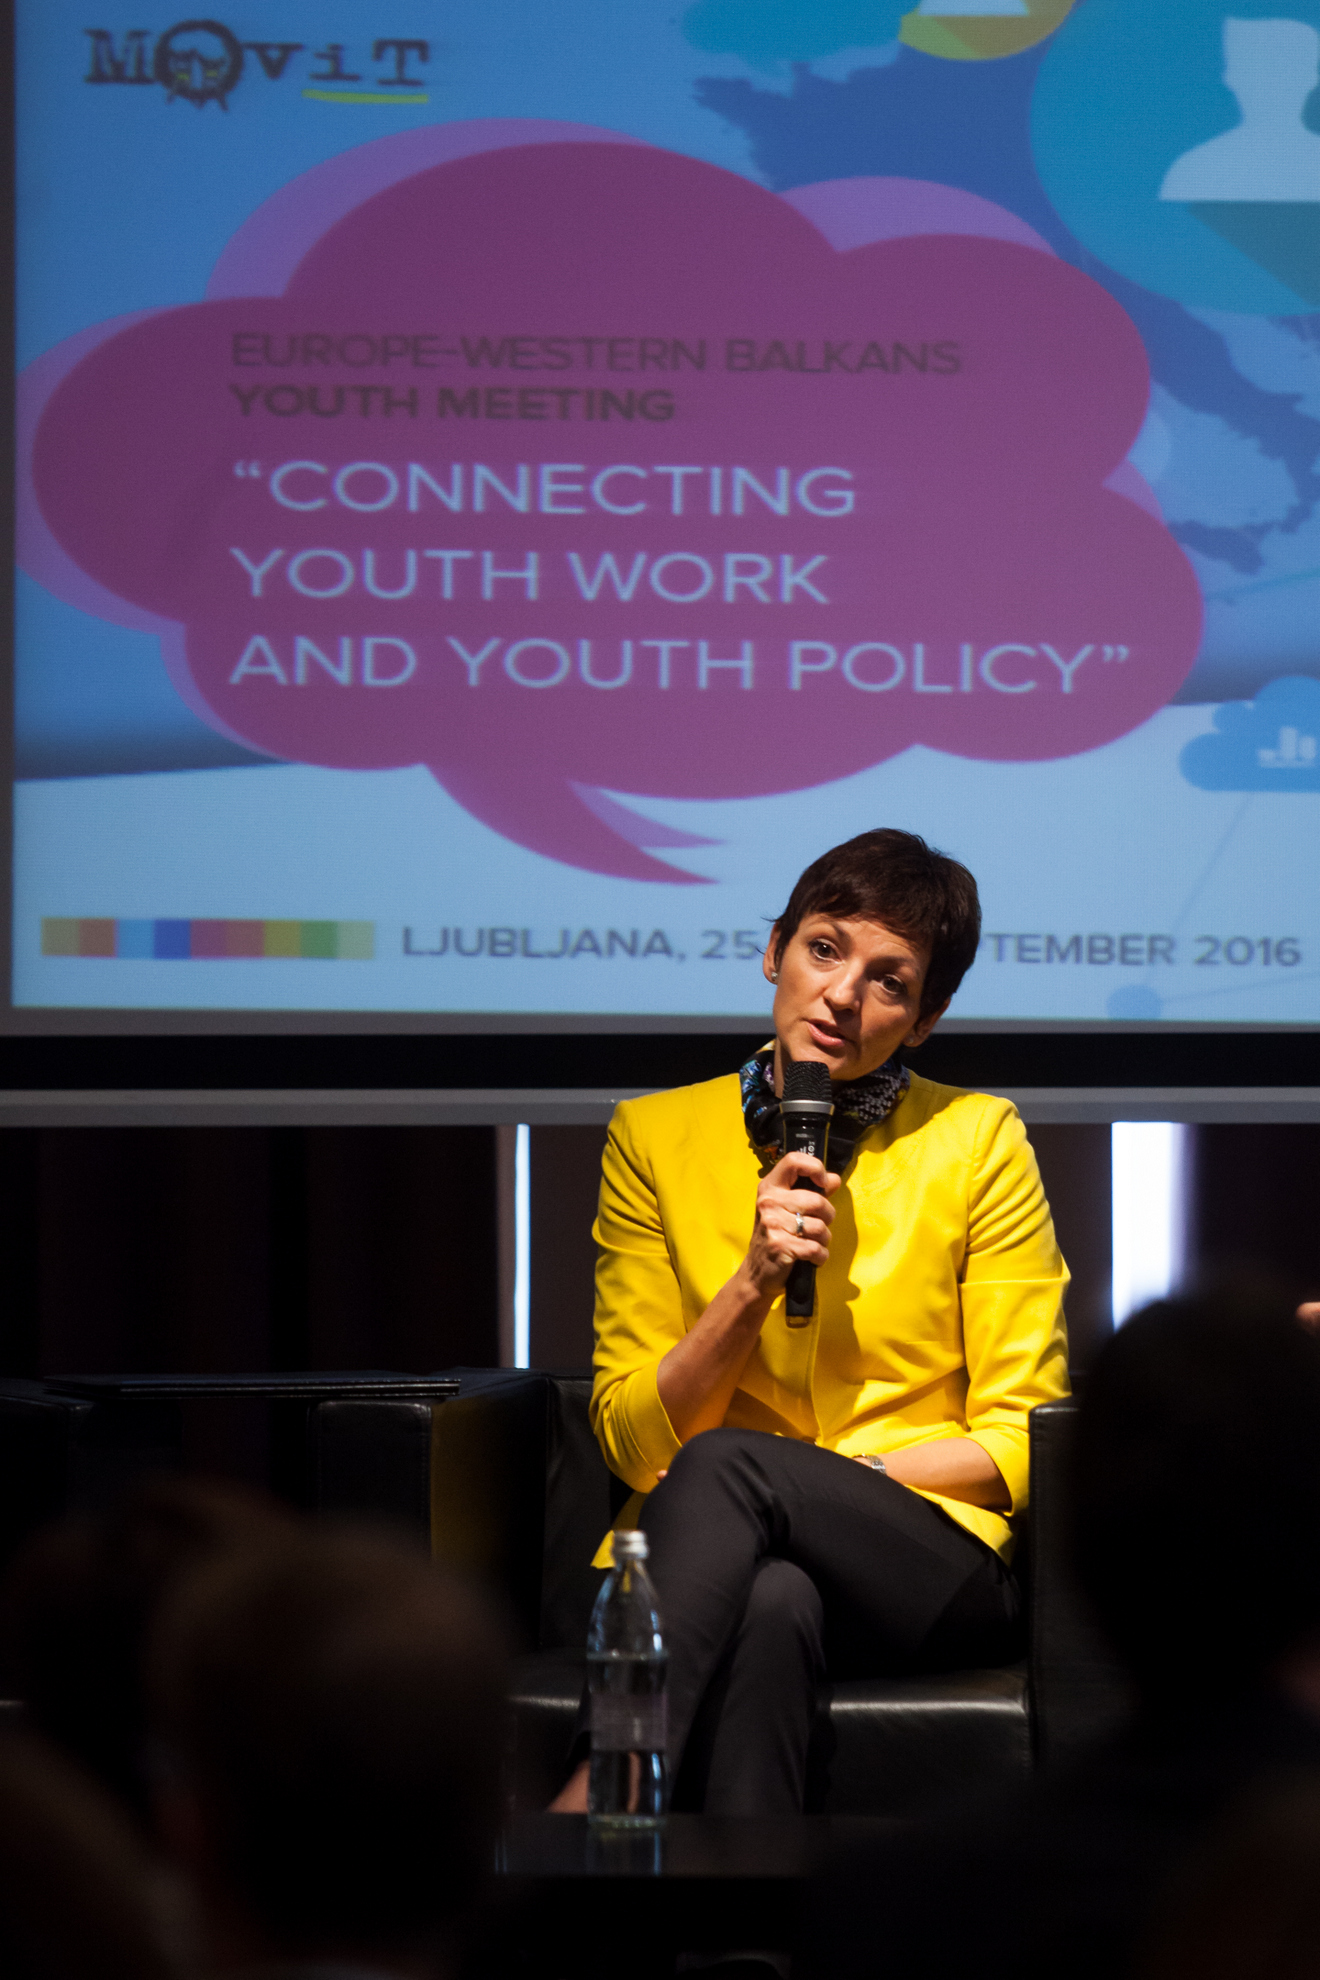 26.09.2016 Ljubljaan, Hotel Slon. Konfenece, Europe - Western Balkans Youth Meeting "Connecting Youth Work and Youth Policy"